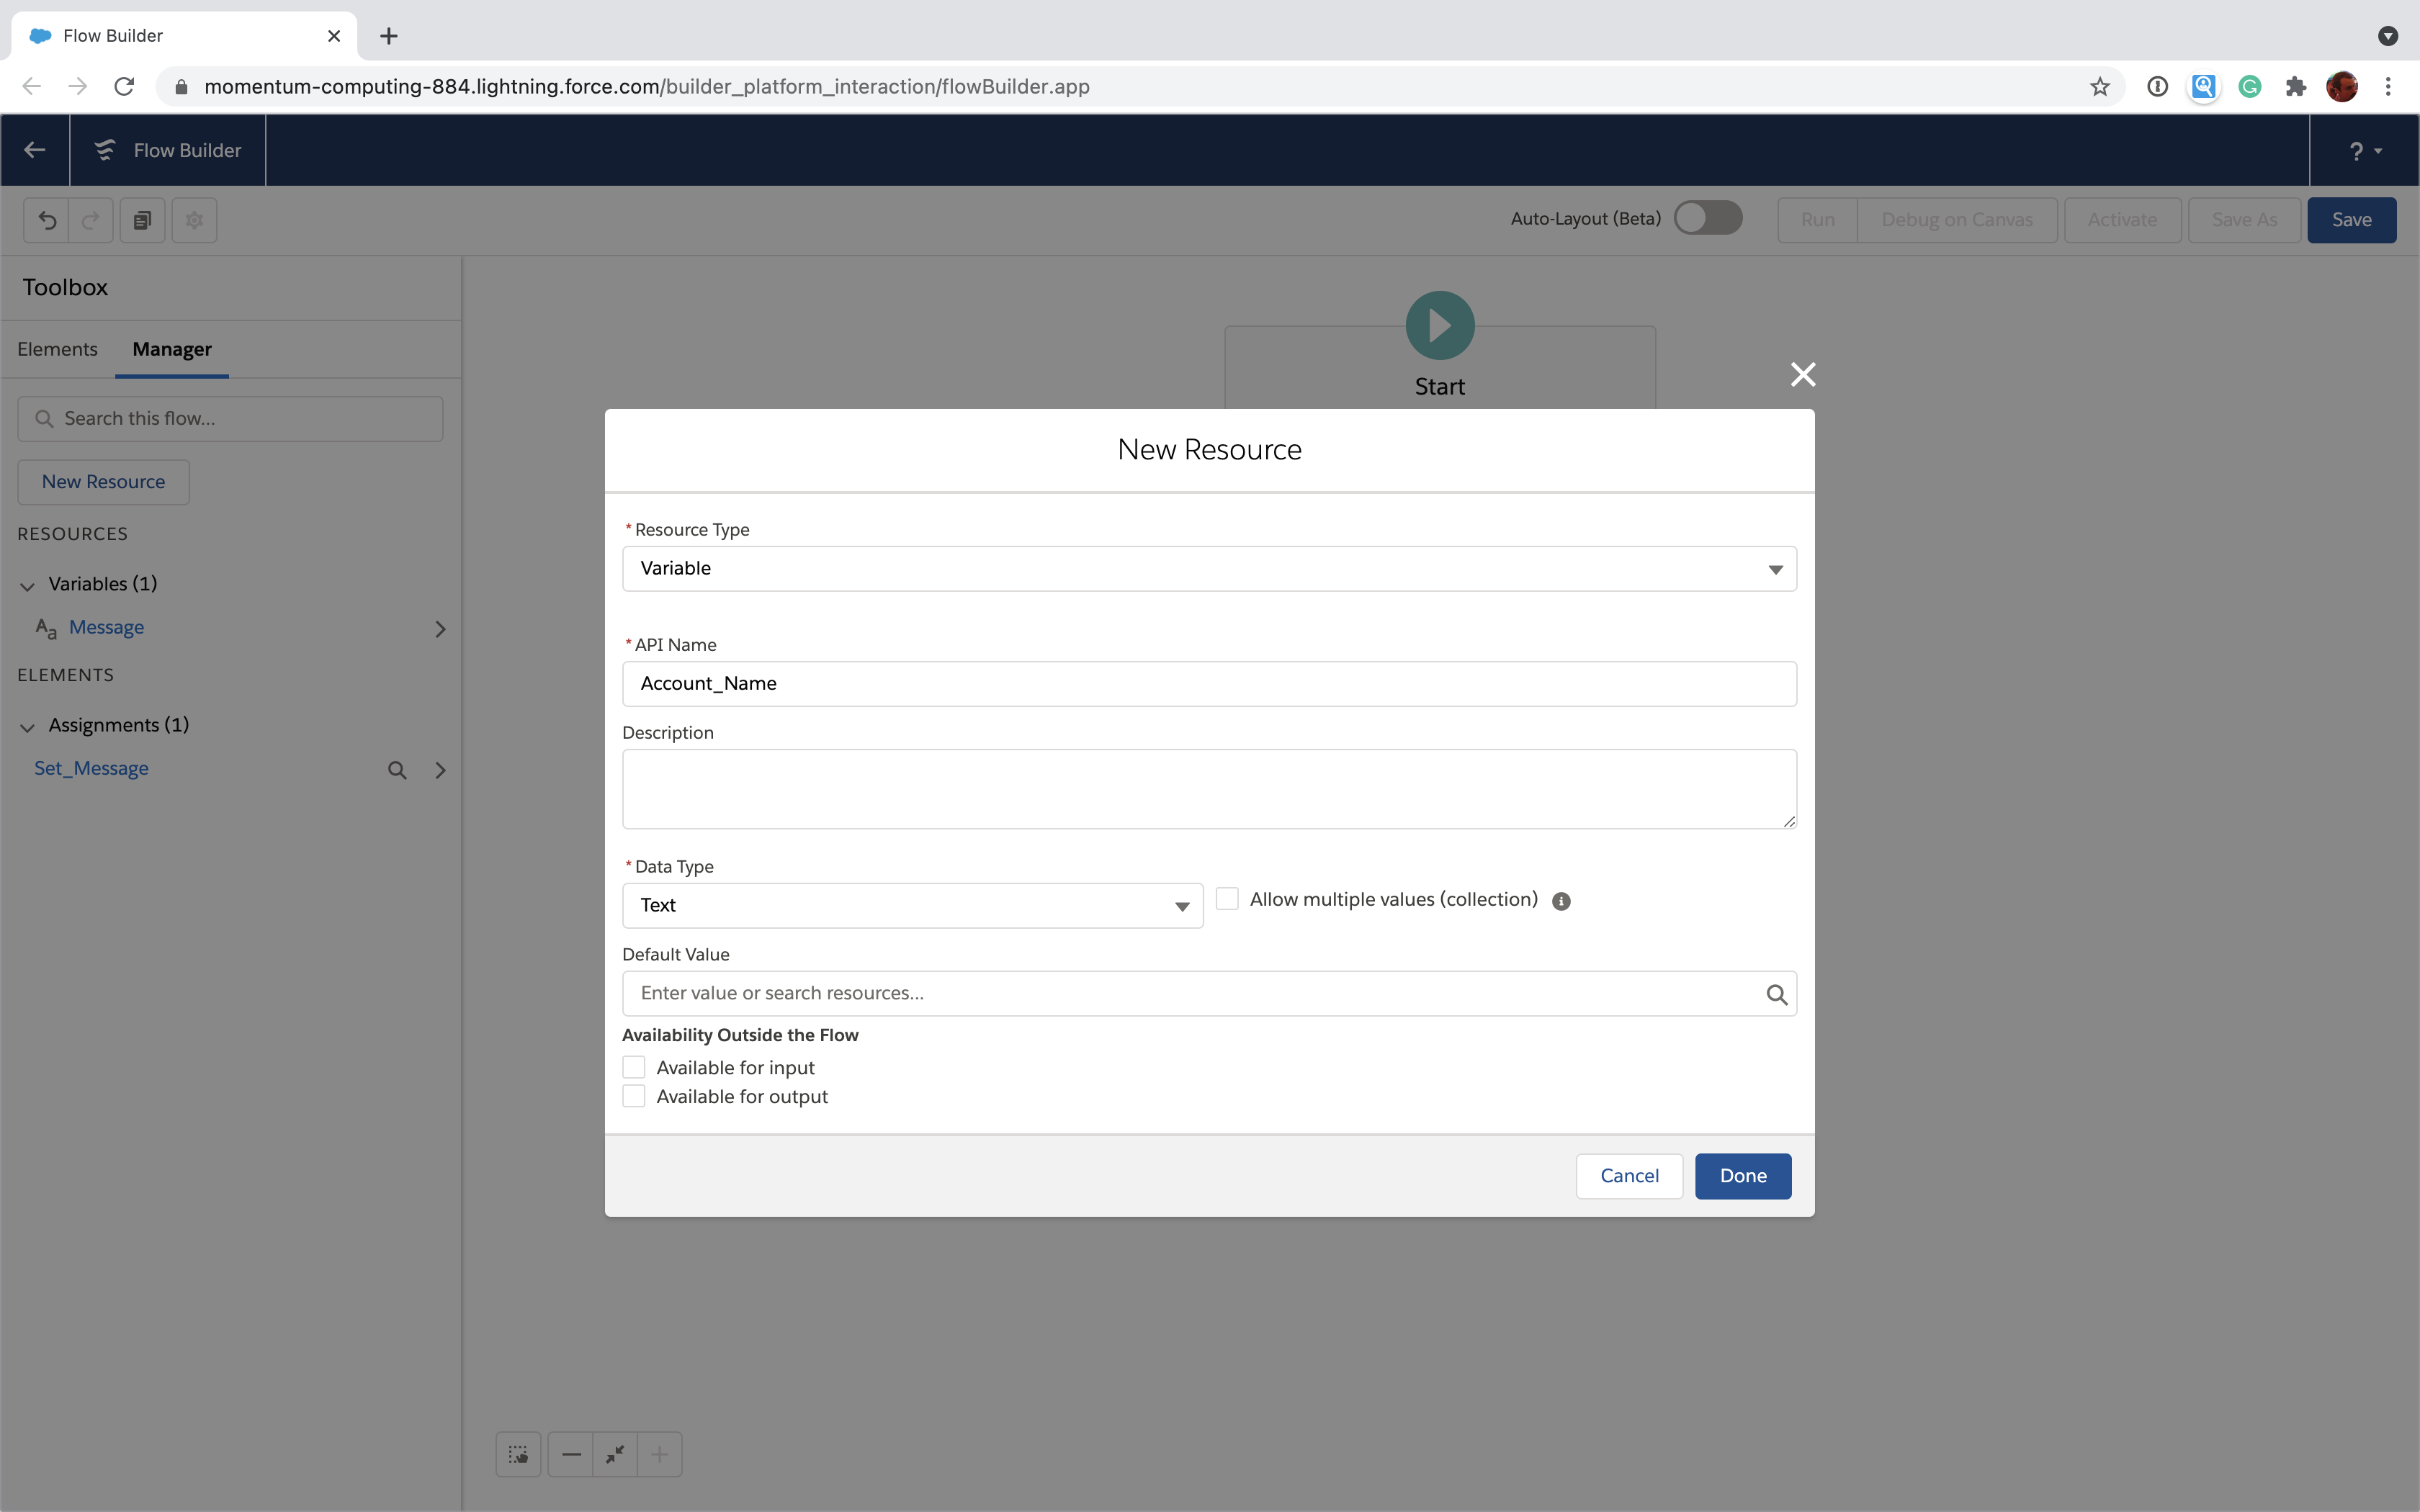 Create an Account_Name variable in Salesforce Flow